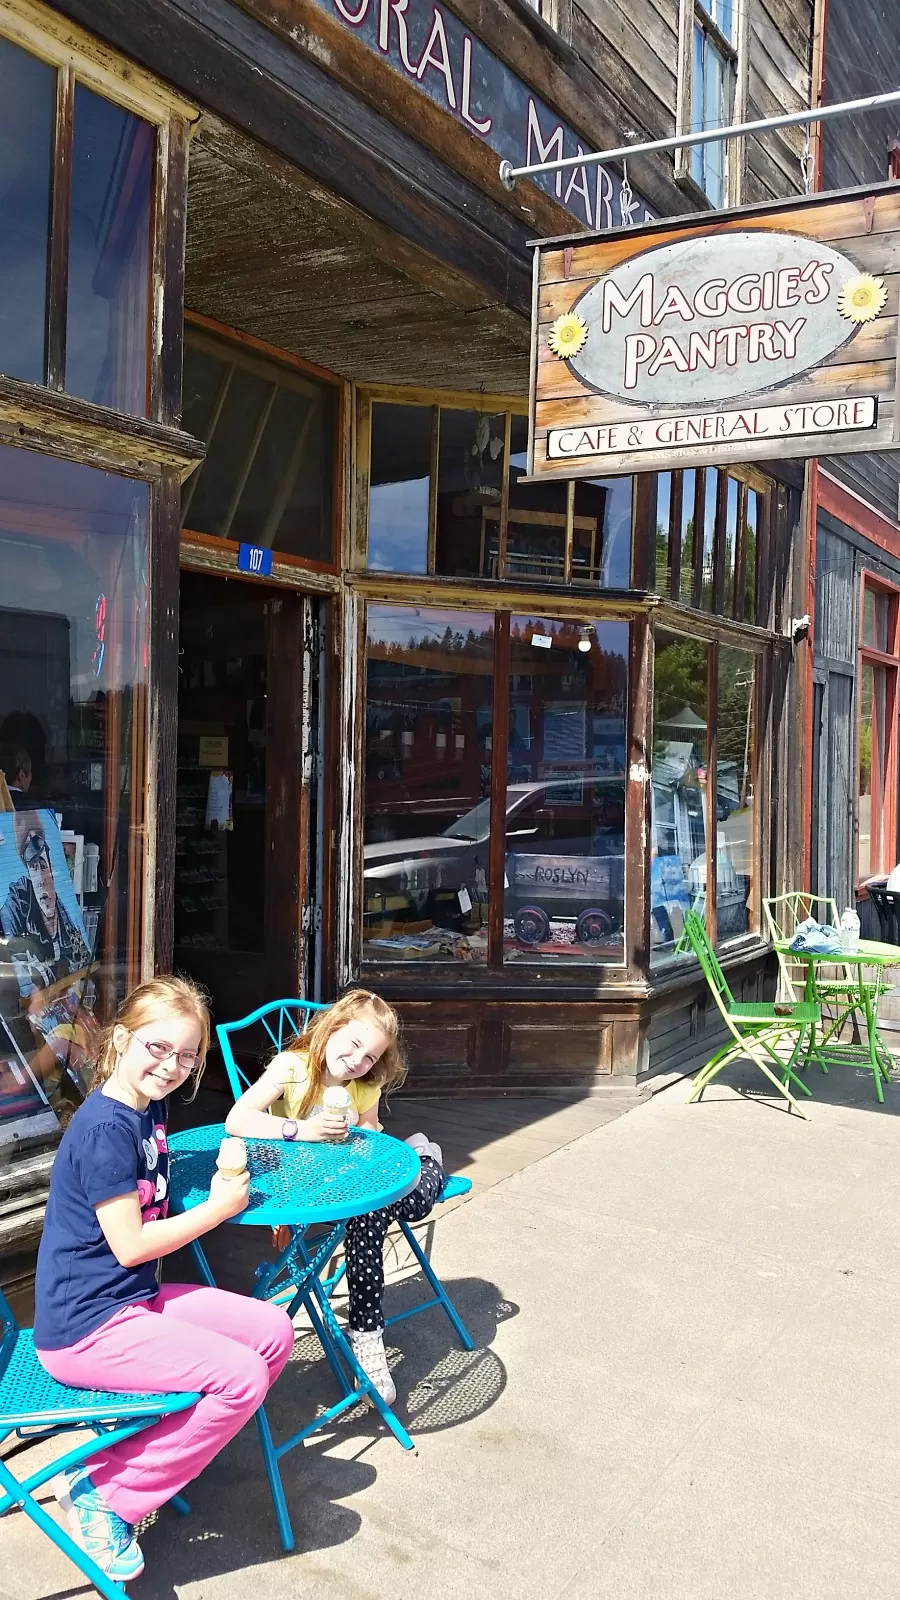 Maggie's Pantry - An Organic Grocery Store, Cafe & Ice Cream Shop in Roslyn WA